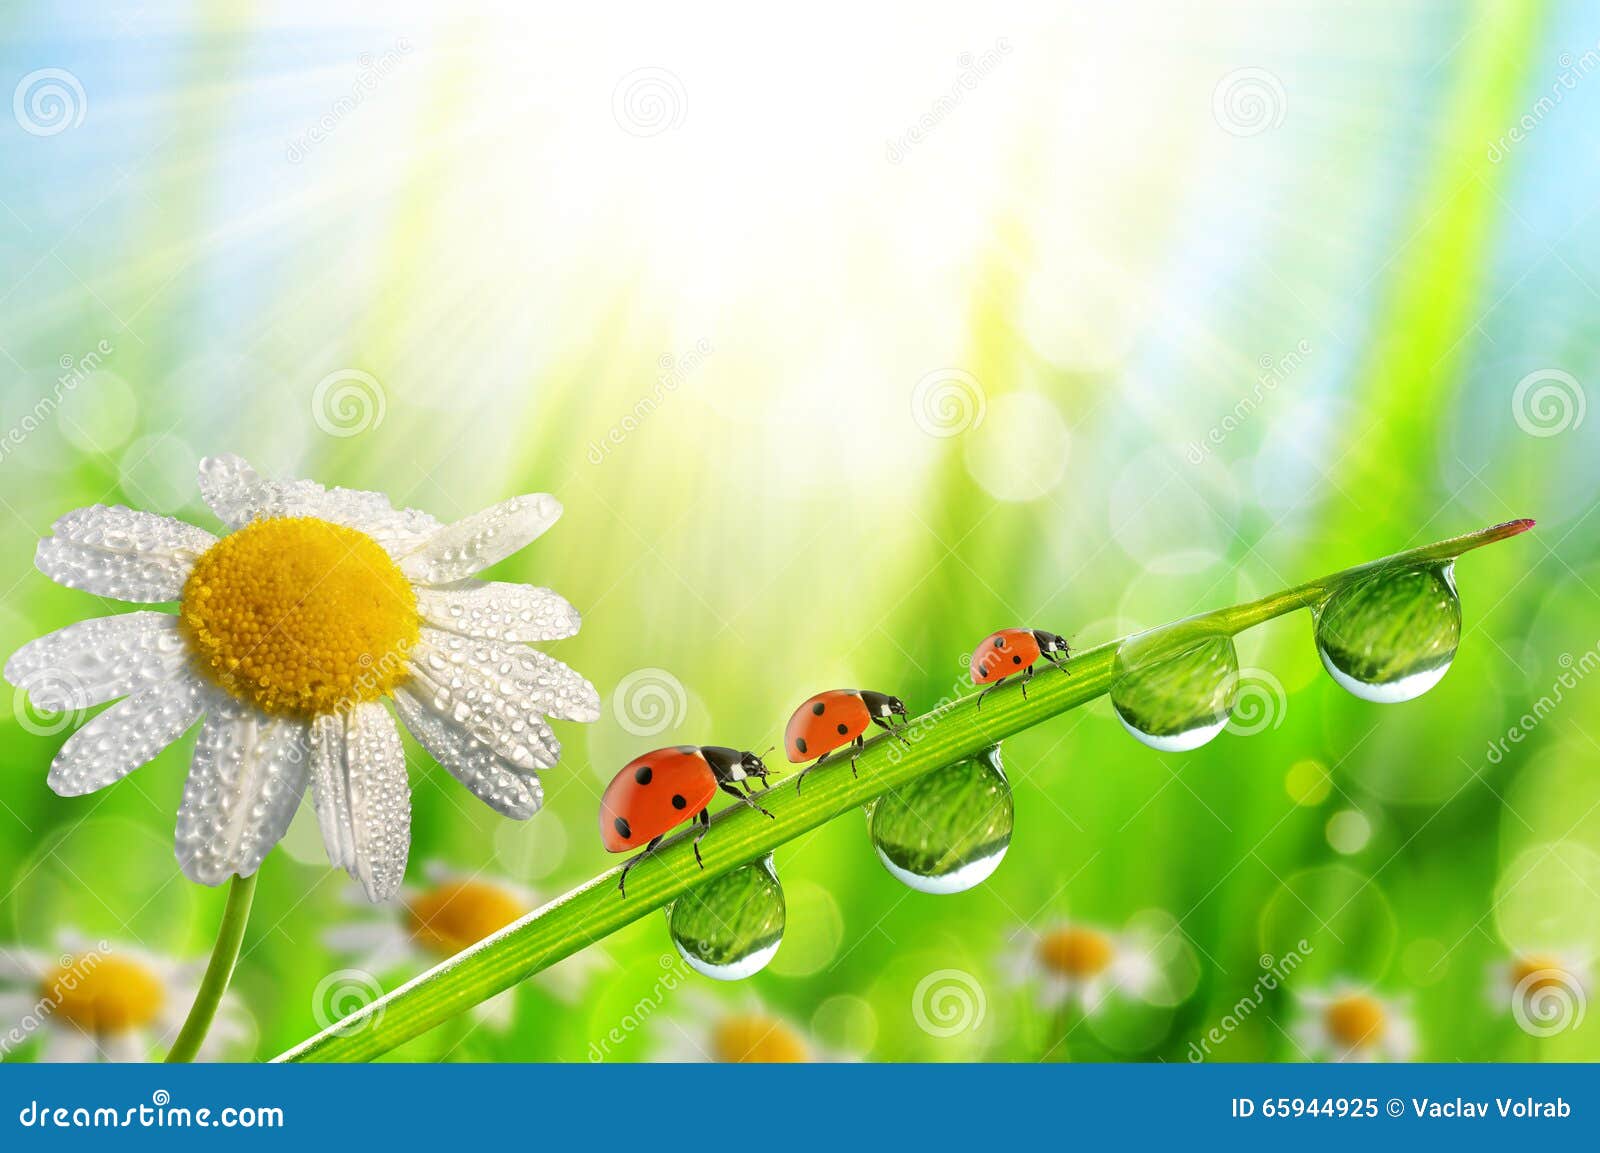 spring flower daisy and ladybugs on green grass with dew drops.